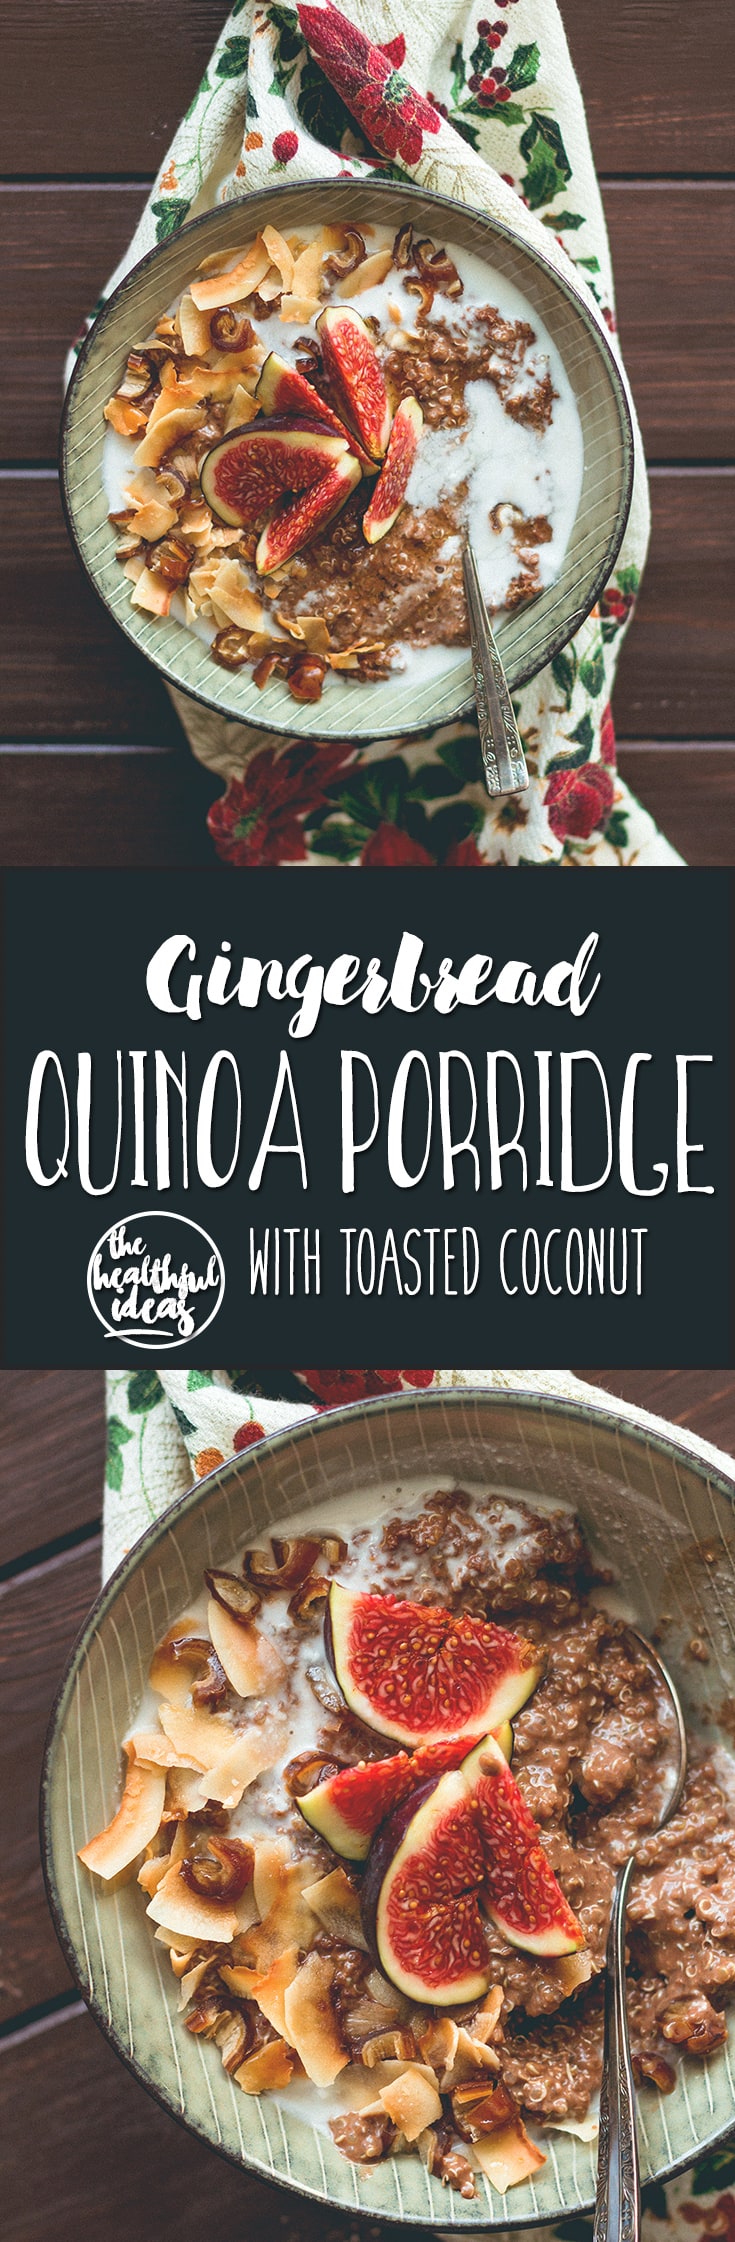 Gingerbread Quinoa Porridge with Toasted Coconut Flakes - vegan GF, and absolutely delicious. The PERFECT Christmas festive porridge! Creamy, spiced to perfection, sweet, satisfying, hearty, and filling. | thehealthfulideas.com